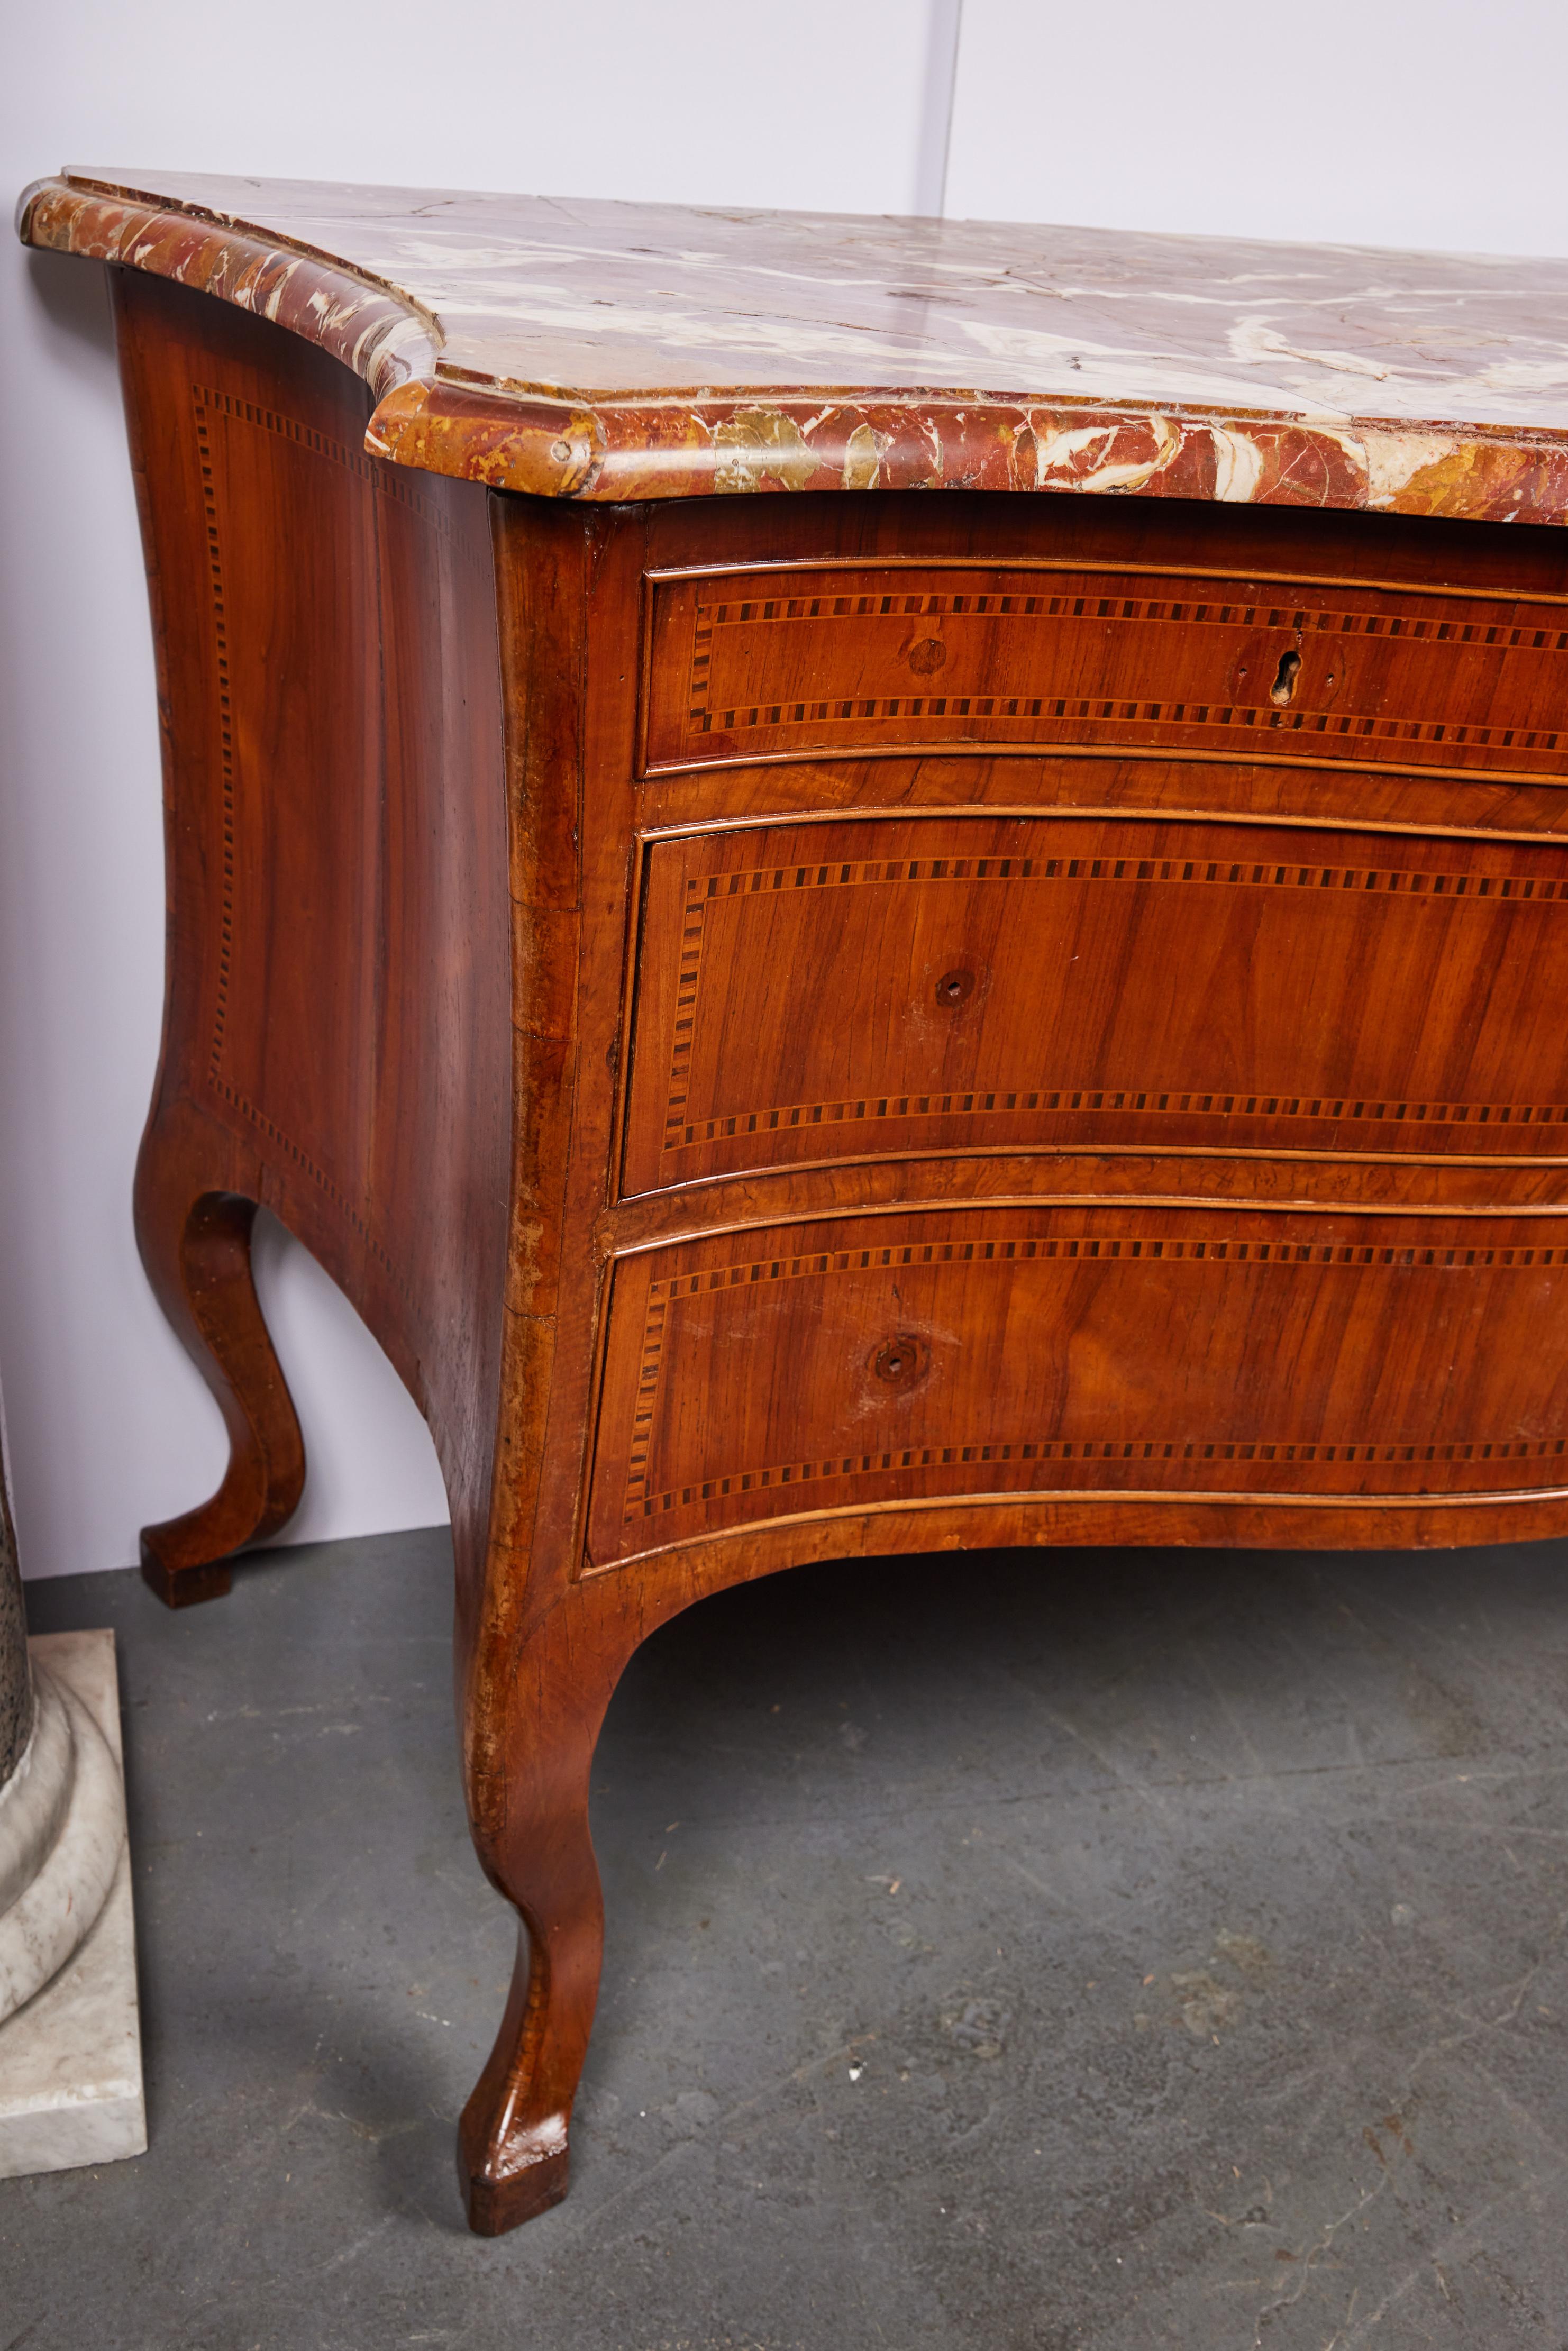 A hand-carved, bow front, serpentine, veneered and inlaid, four drawer commode surmounted by the original, rouge marble top. The whole on wonderful, exaggerated cabriole legs. From the Veneto, Italy.